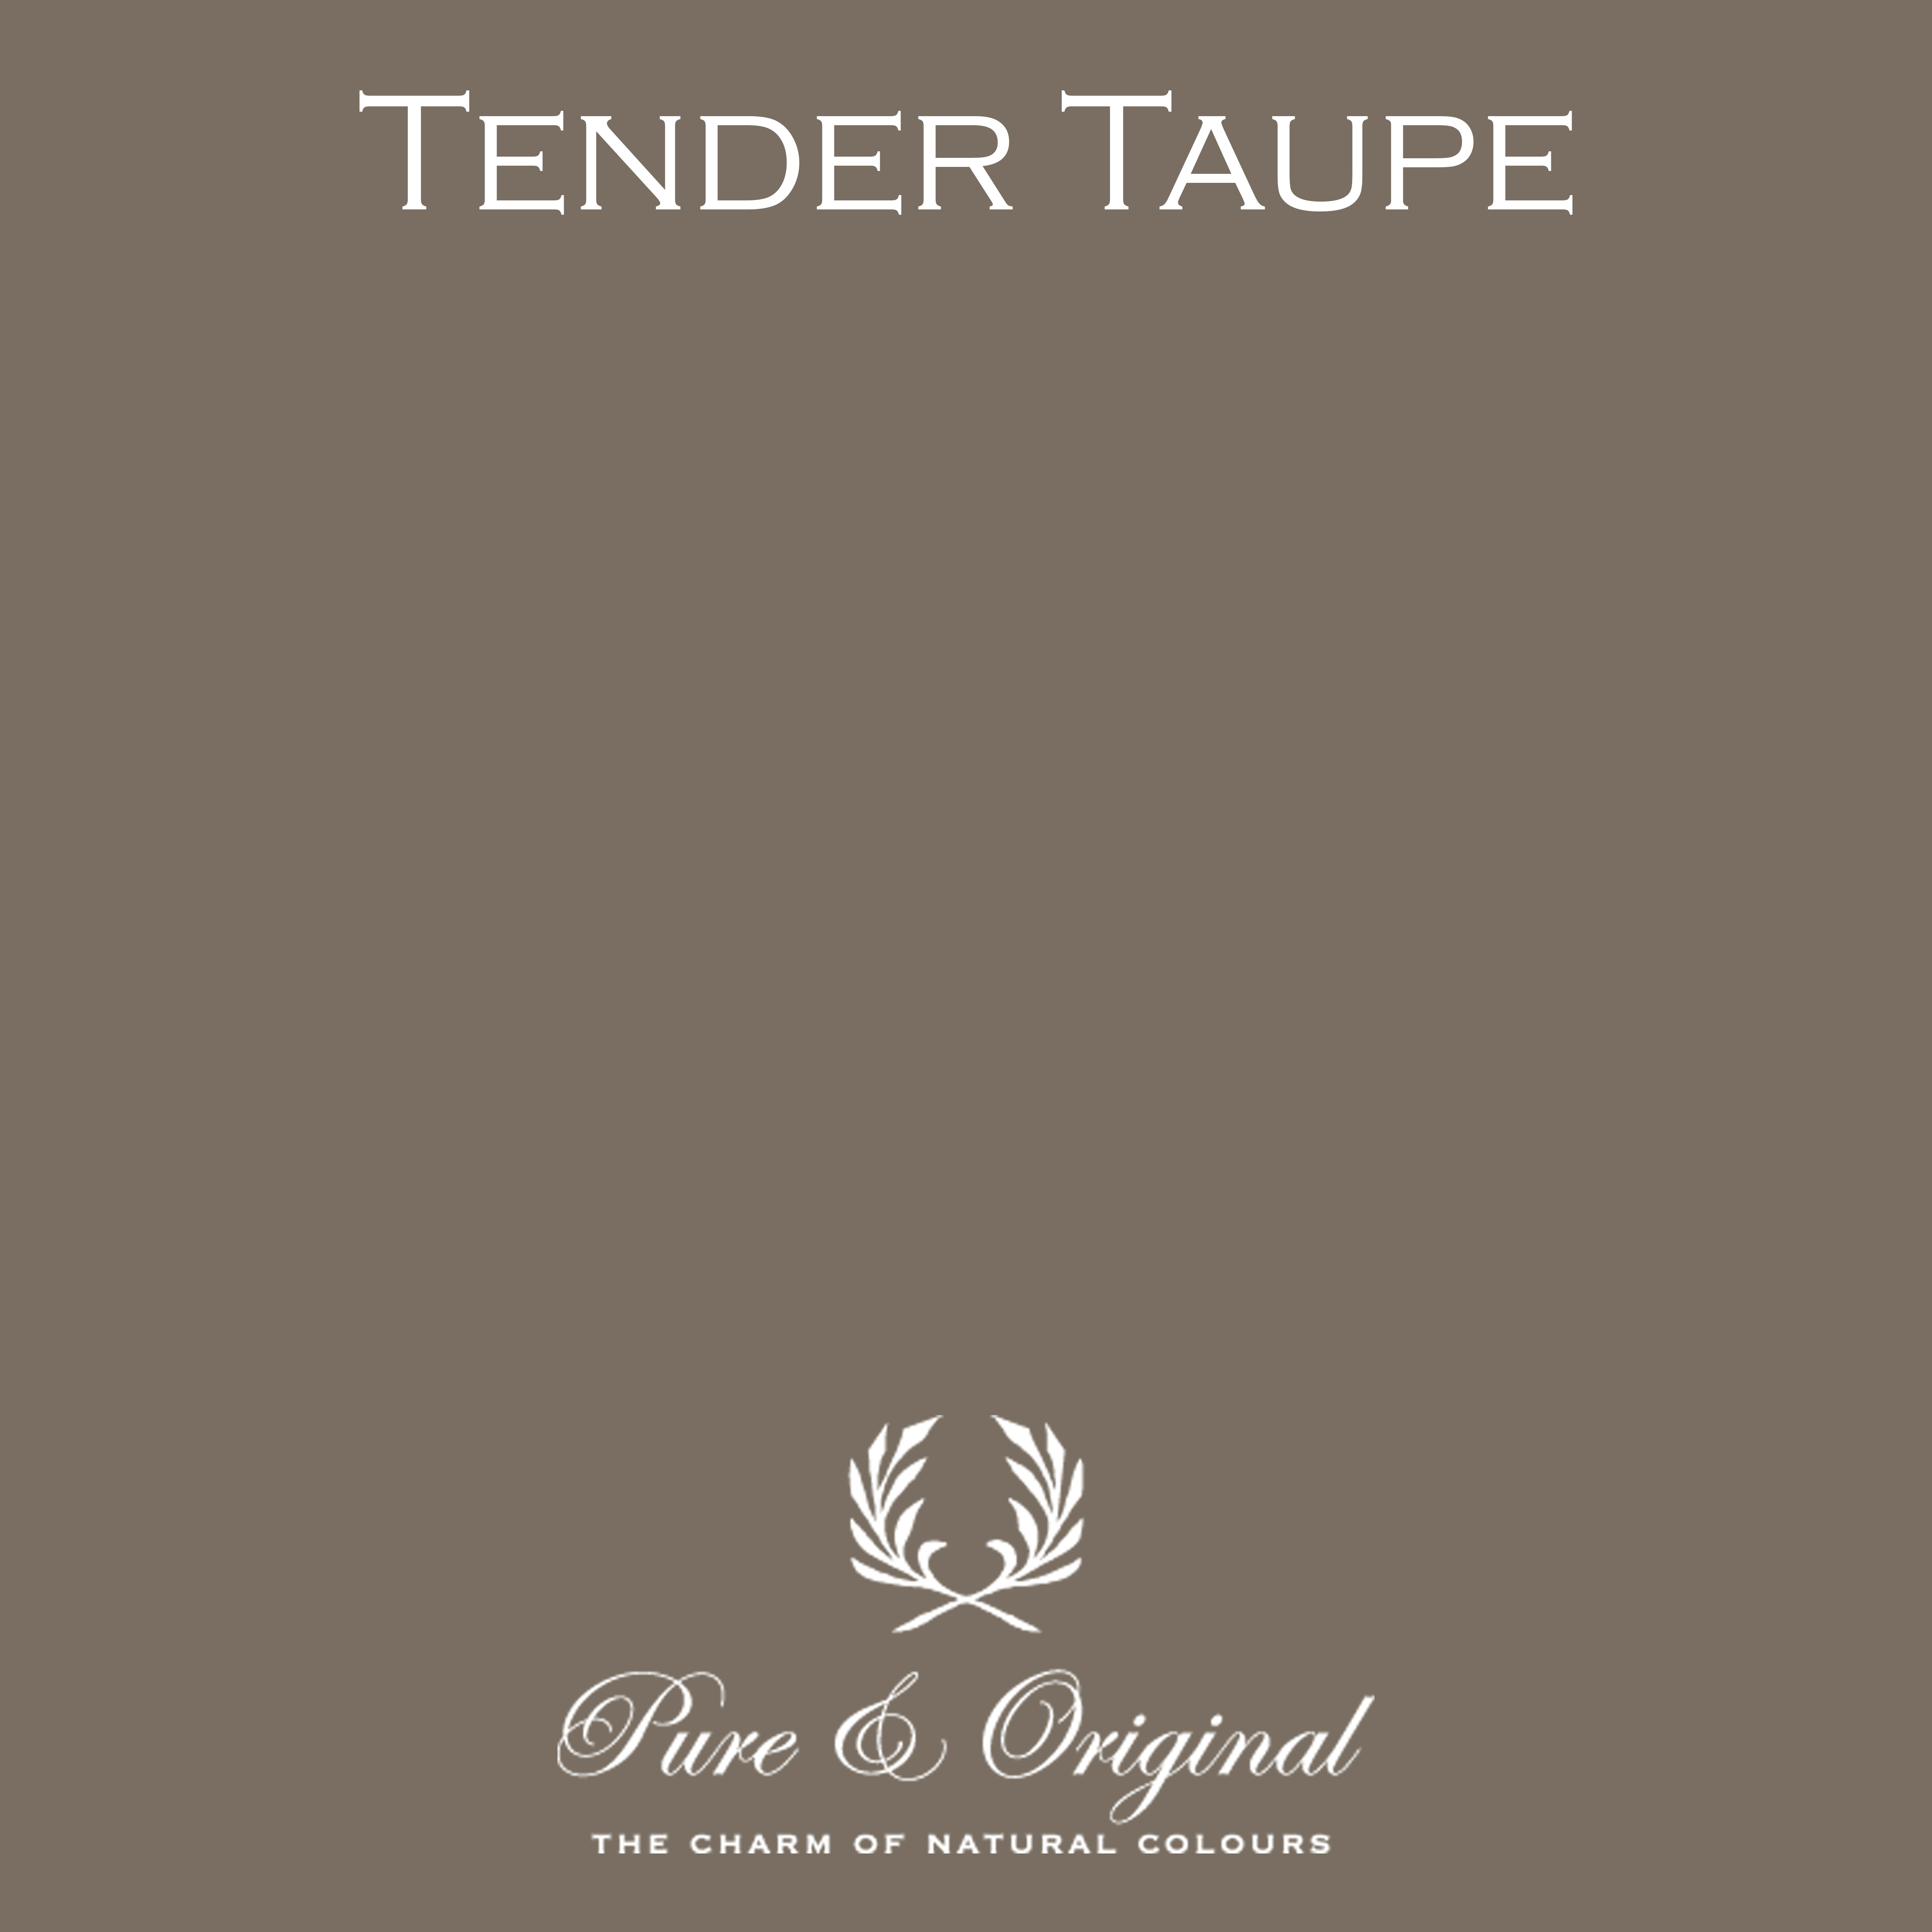 pure&orignal-traditional-paint-oilbased-lak-tender-taupe-1